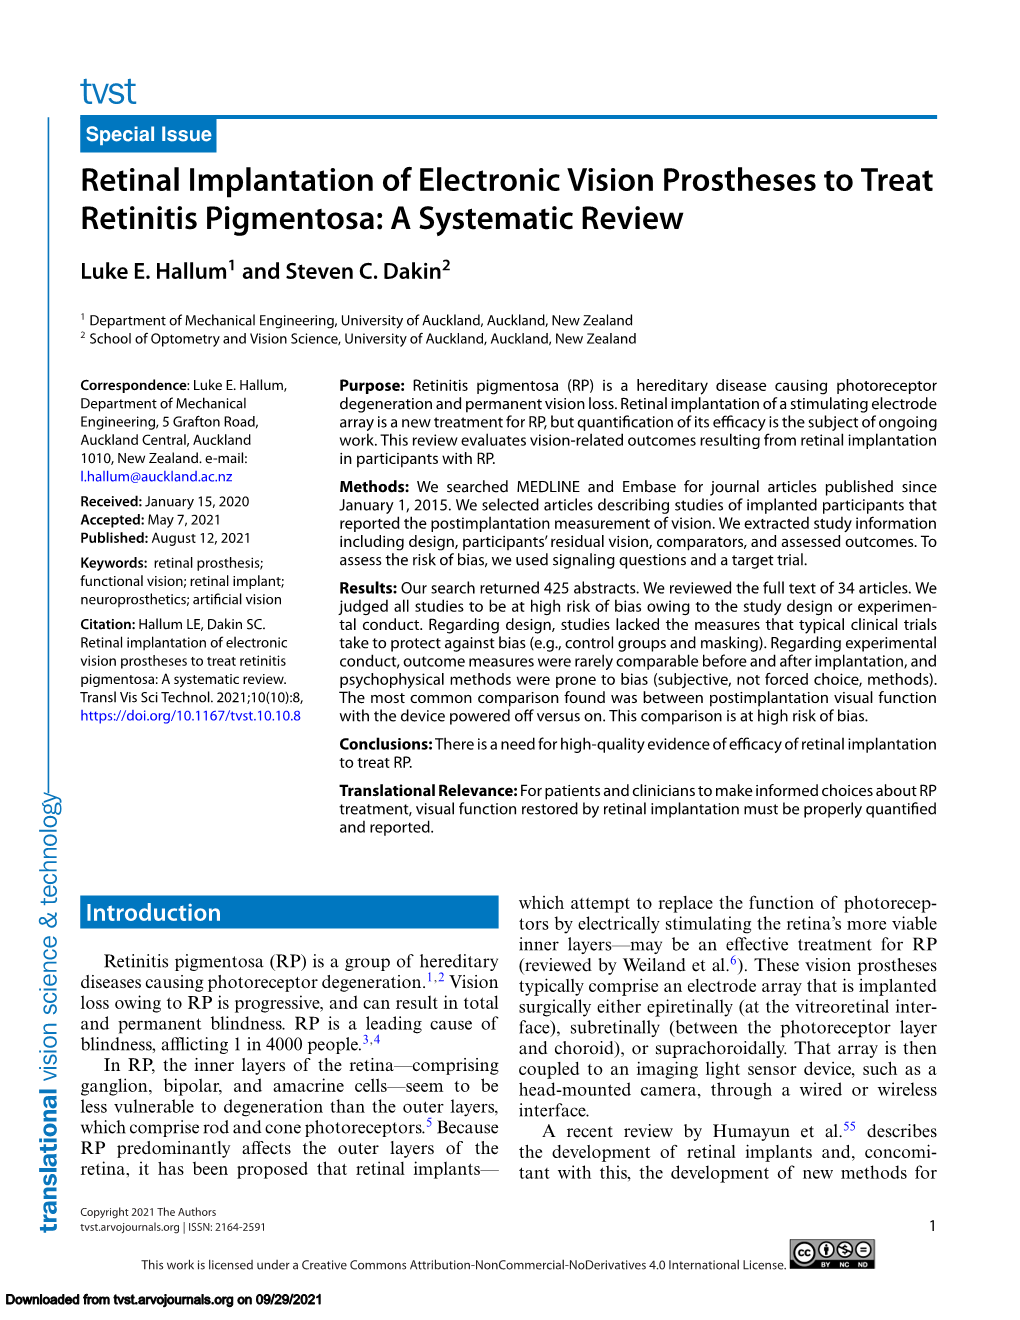 Retinal Implantation of Electronic Vision Prostheses to Treat Retinitis Pigmentosa: a Systematic Review